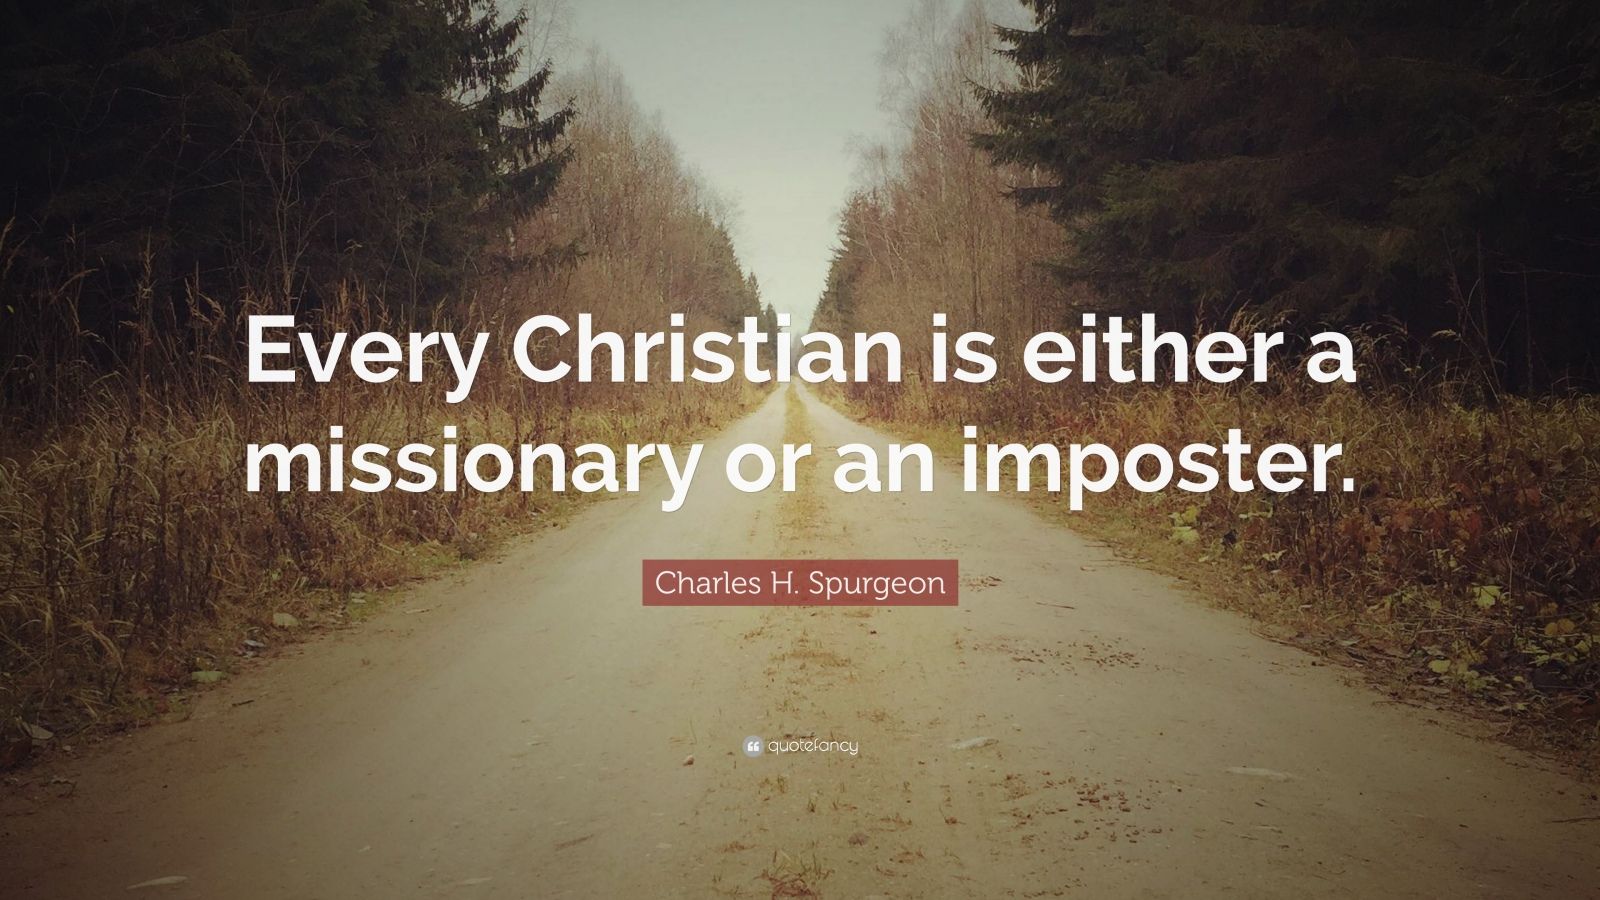 Charles H. Spurgeon Quote: “Every Christian is either a missionary or an imposter.”